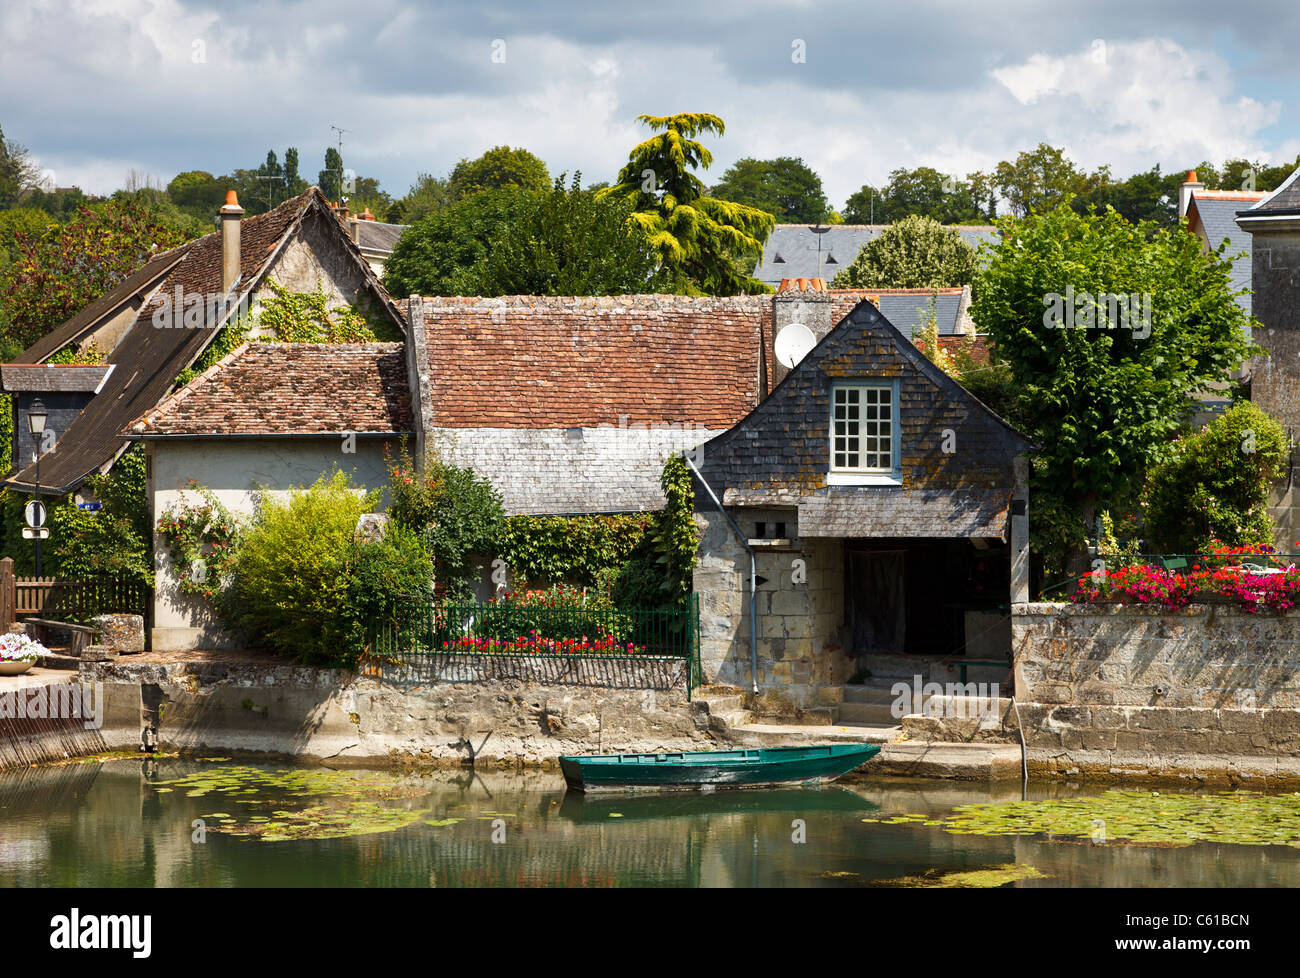 Boat house on the Indre River at Azay-le-Rideau, Indre et Loire, France, Europe Stock Photo